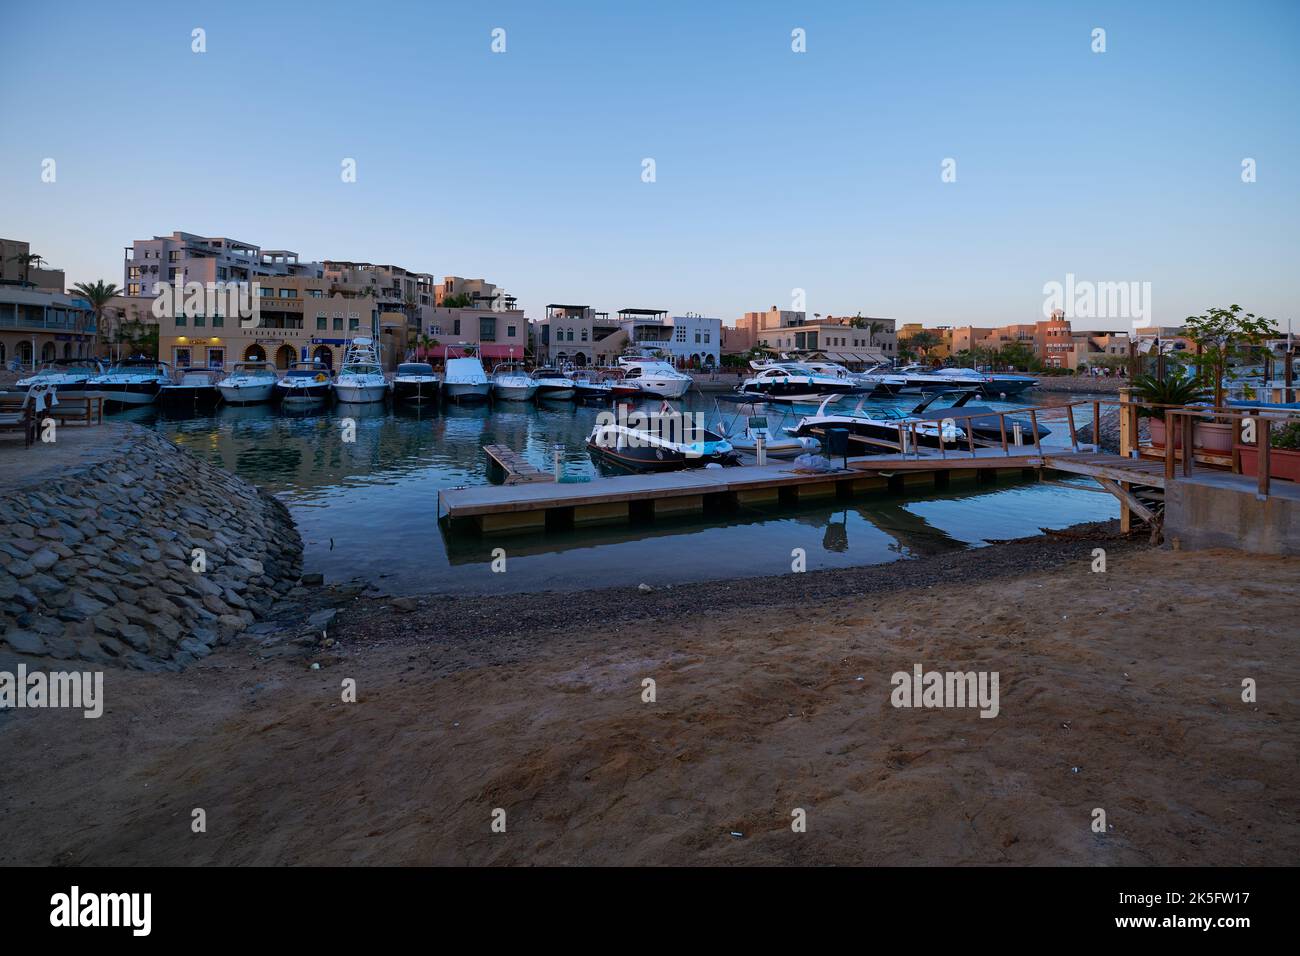 Abu Tig Marina in El Gouna, Hurghada, Red Sea Governorate, Egypt sunset view showing luxury yachts. Stock Photo